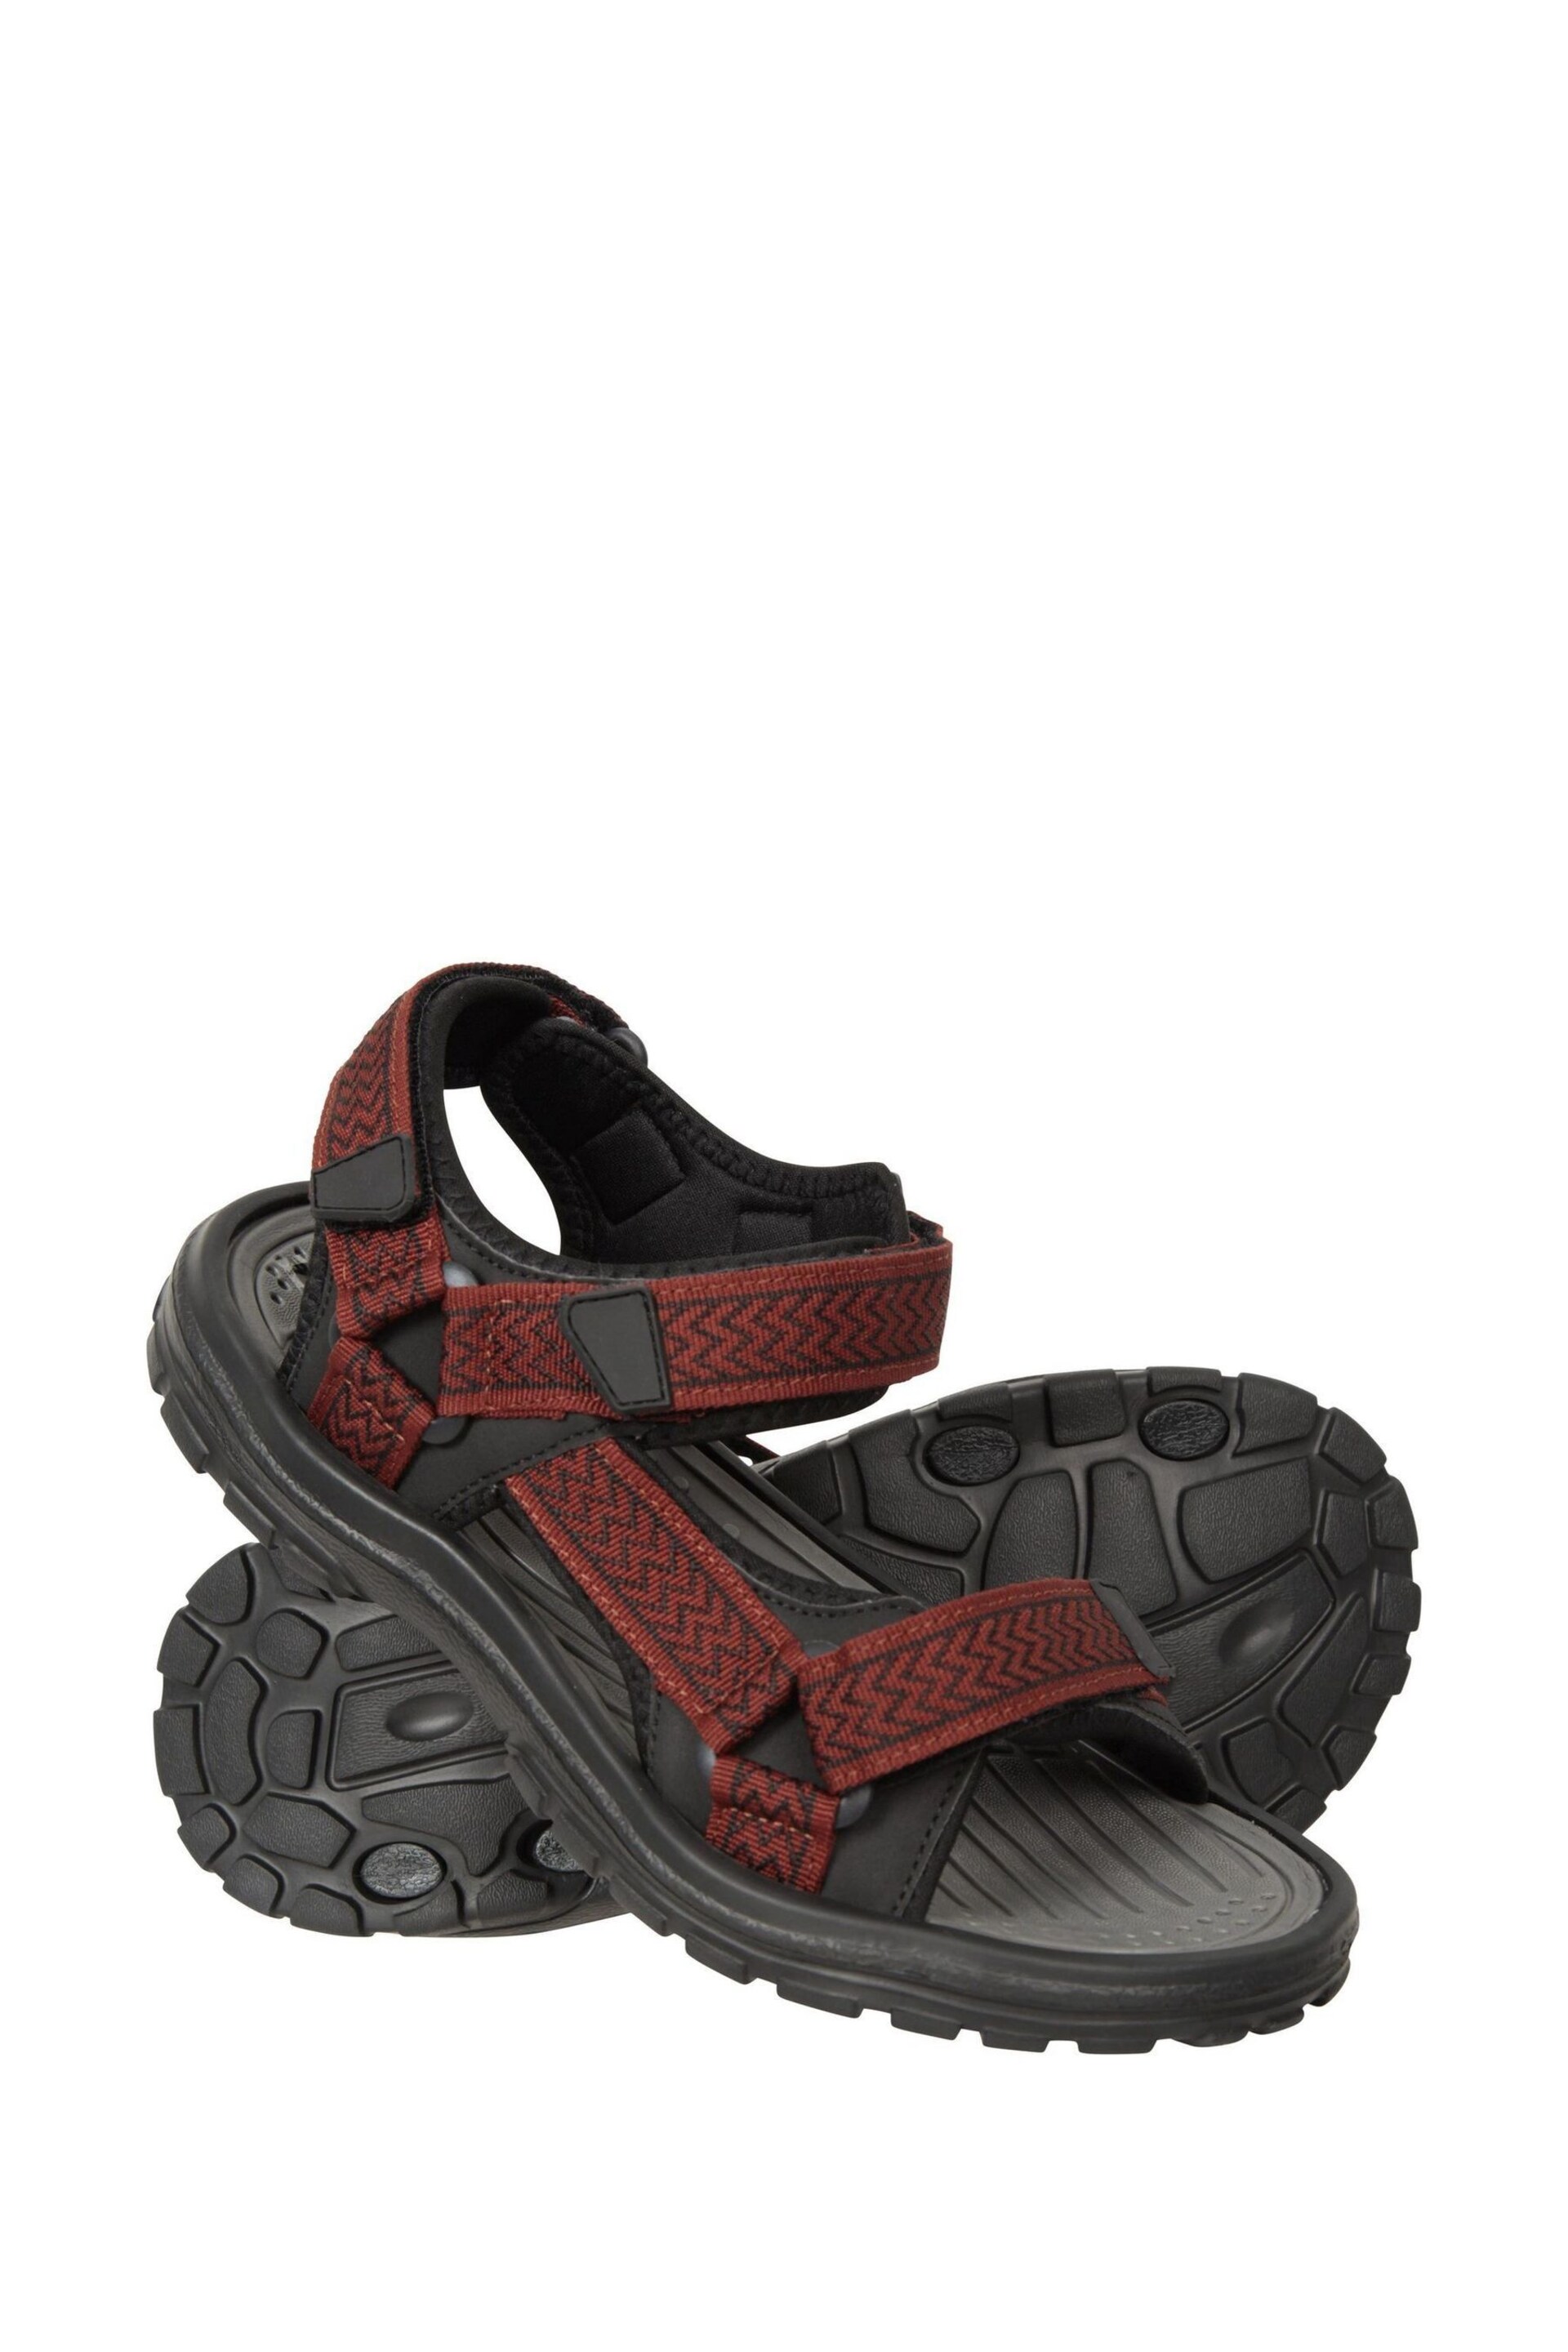 Mountain Warehouse Brown Crete Mens Sandals - Image 1 of 6